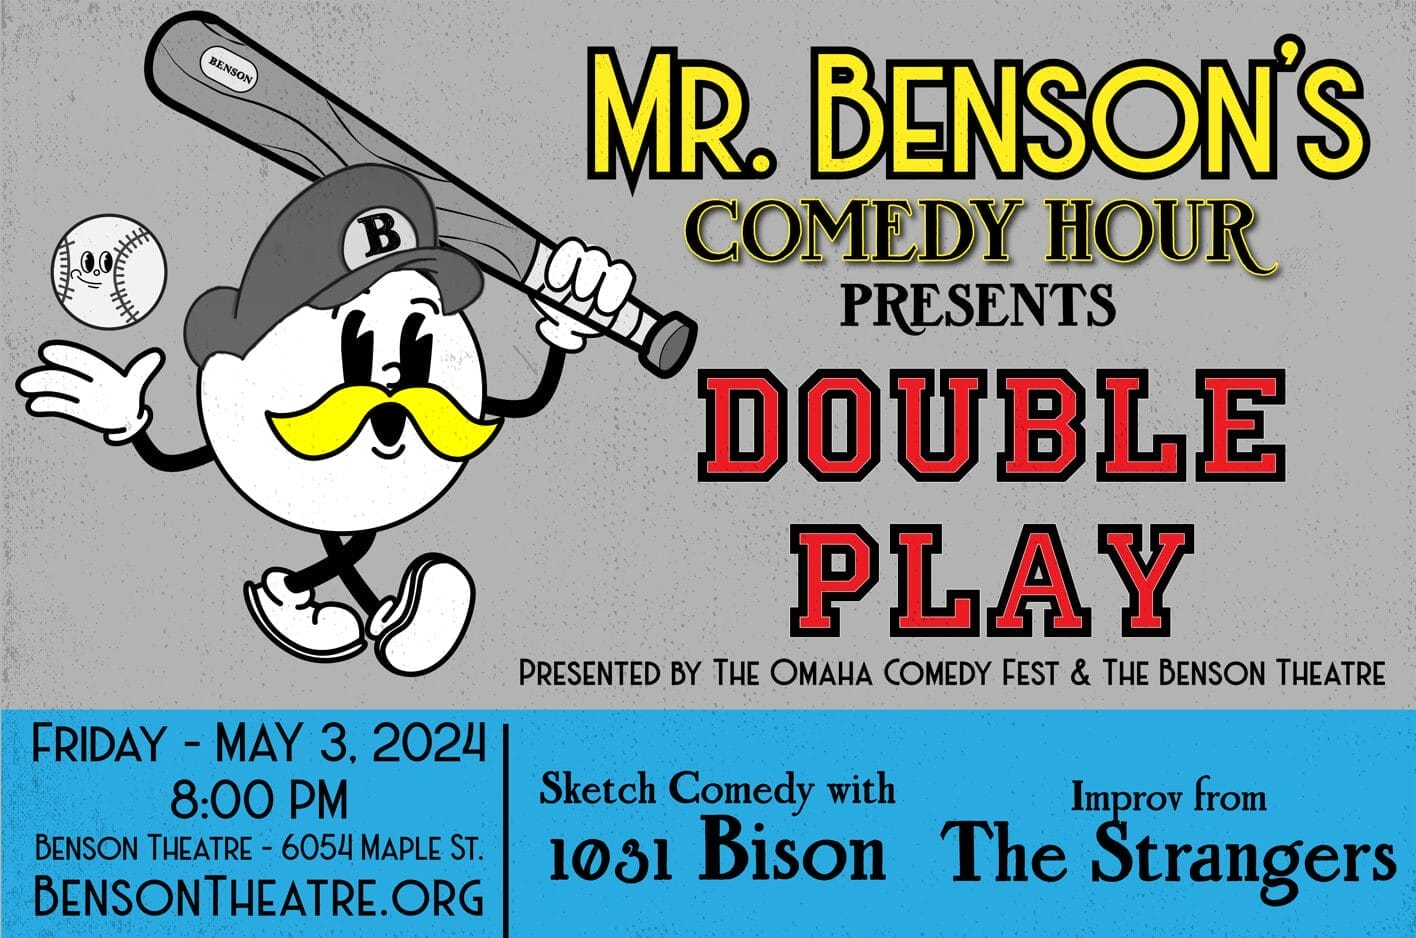 Mr. Benson’s Comedy Hour Presents: Double Play